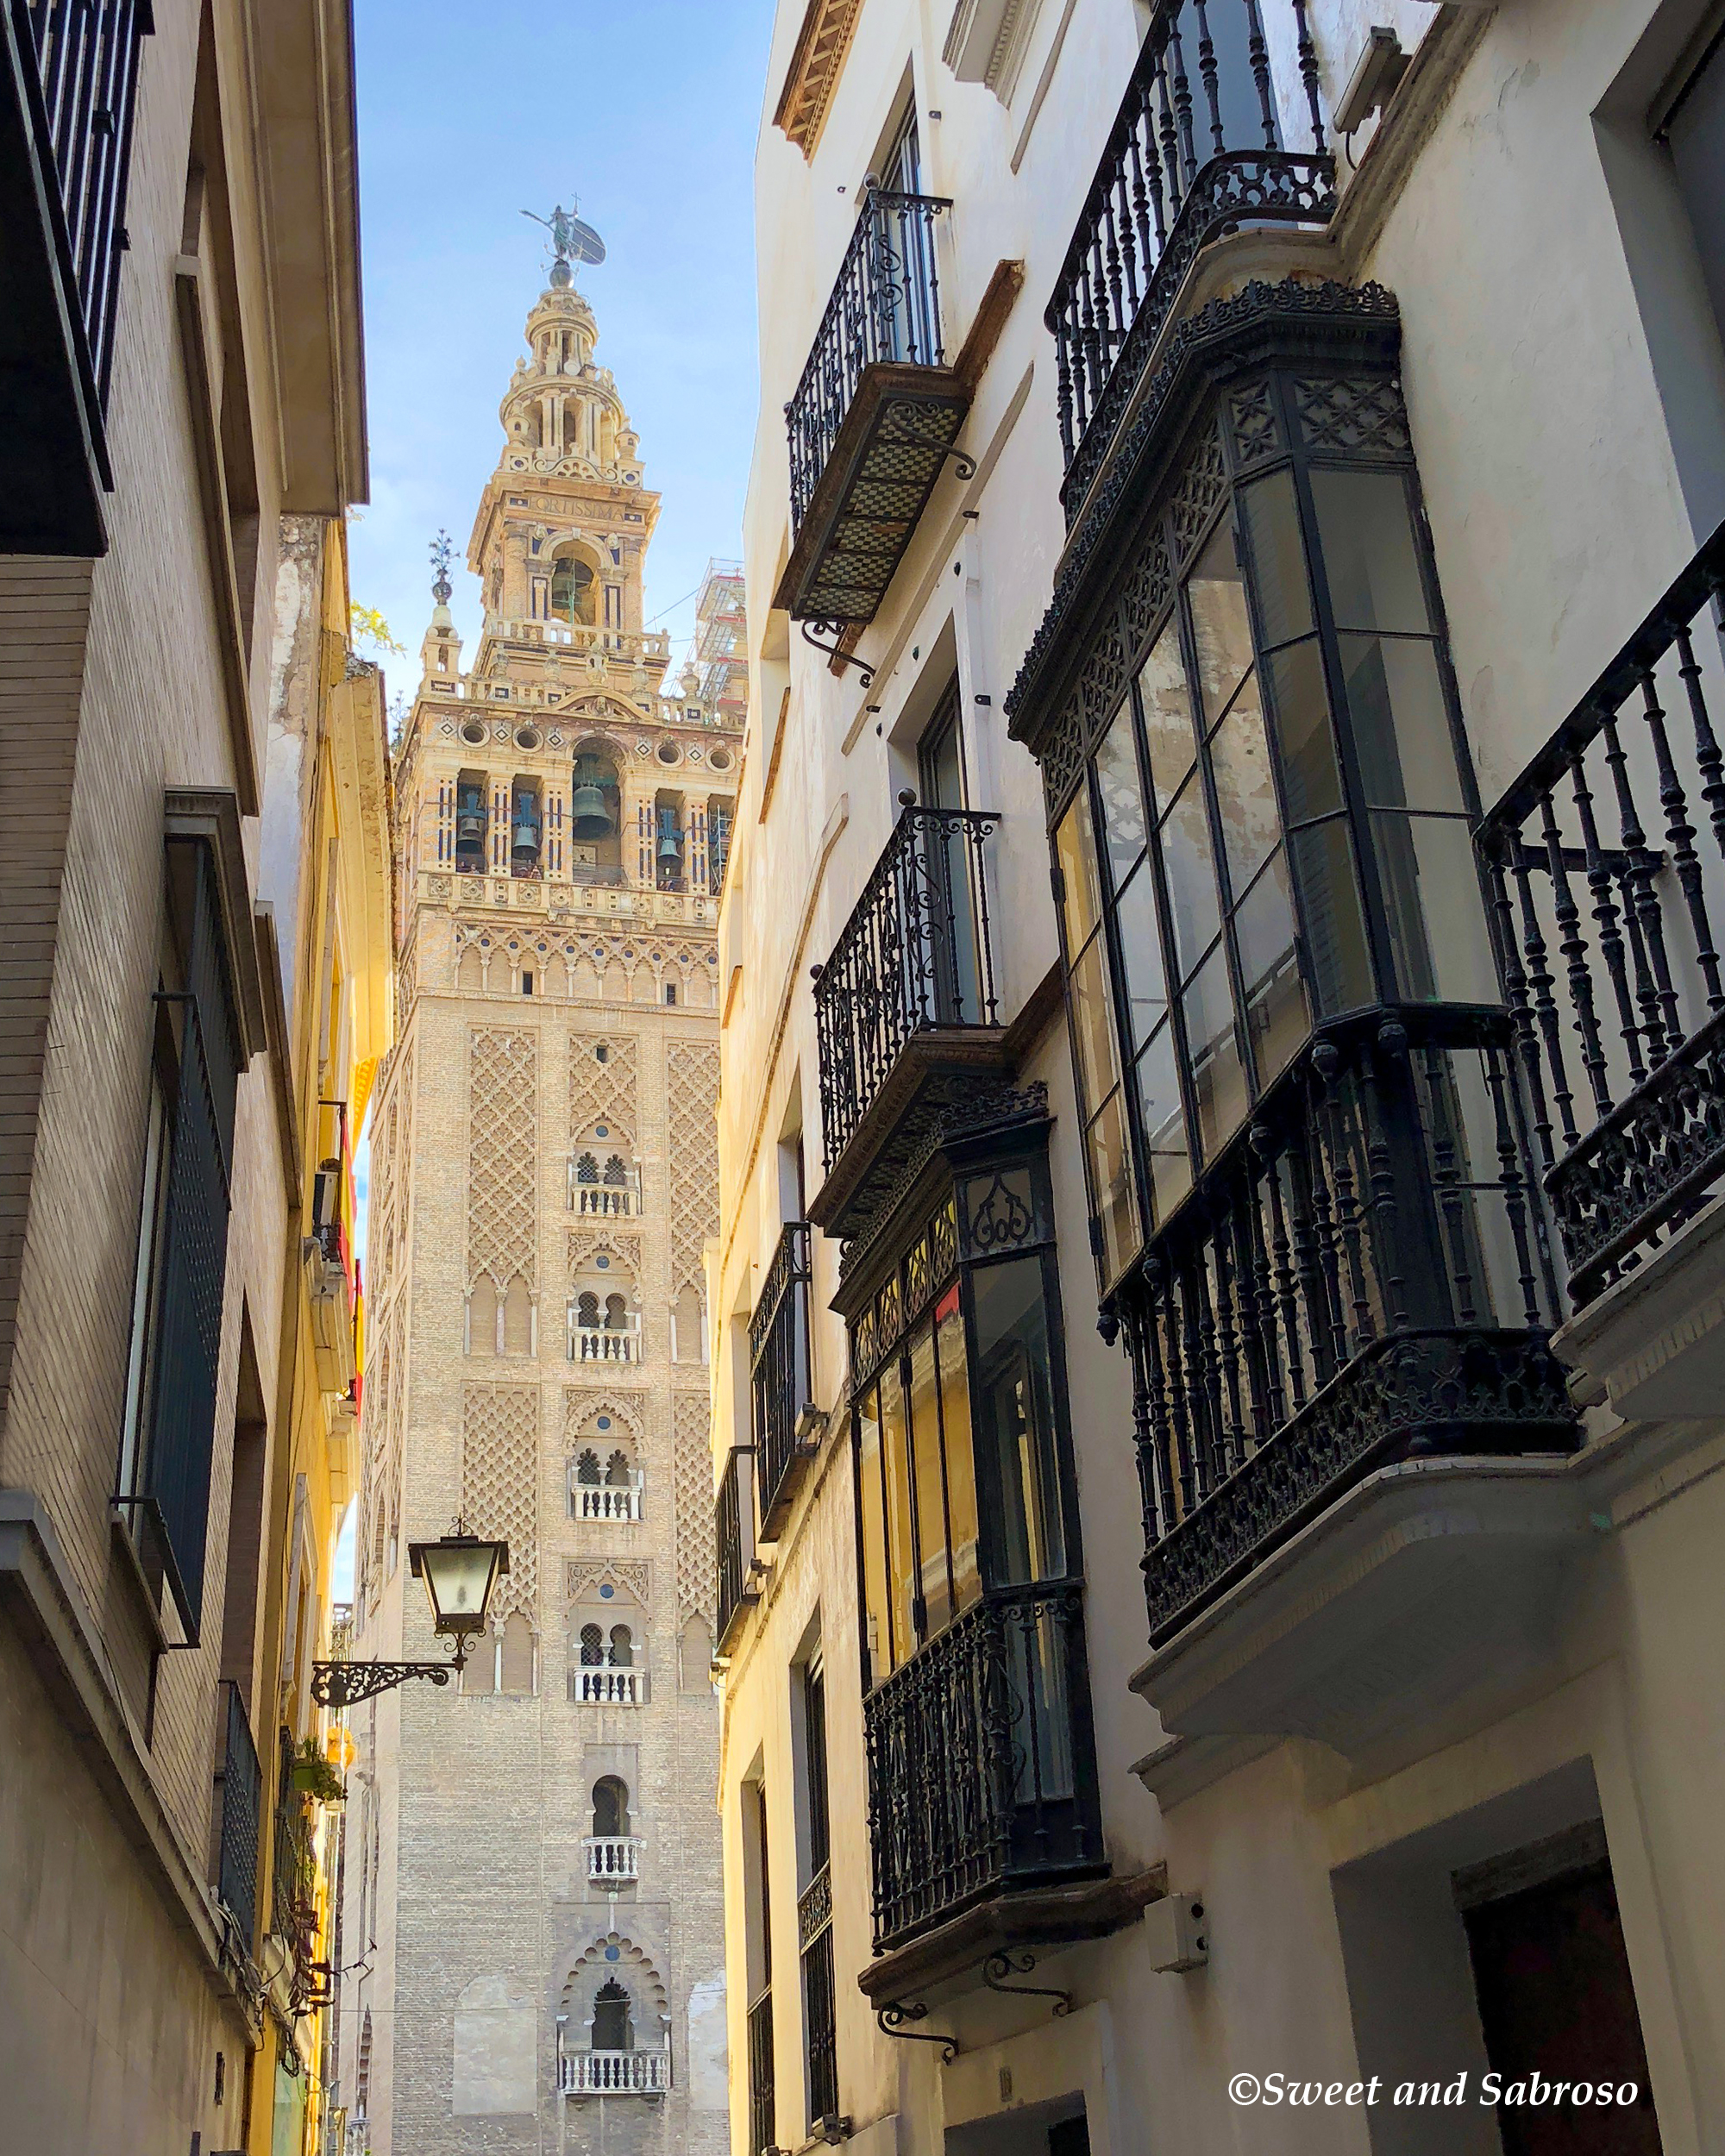 The Giralda bell tower of the Cathedral of Seville